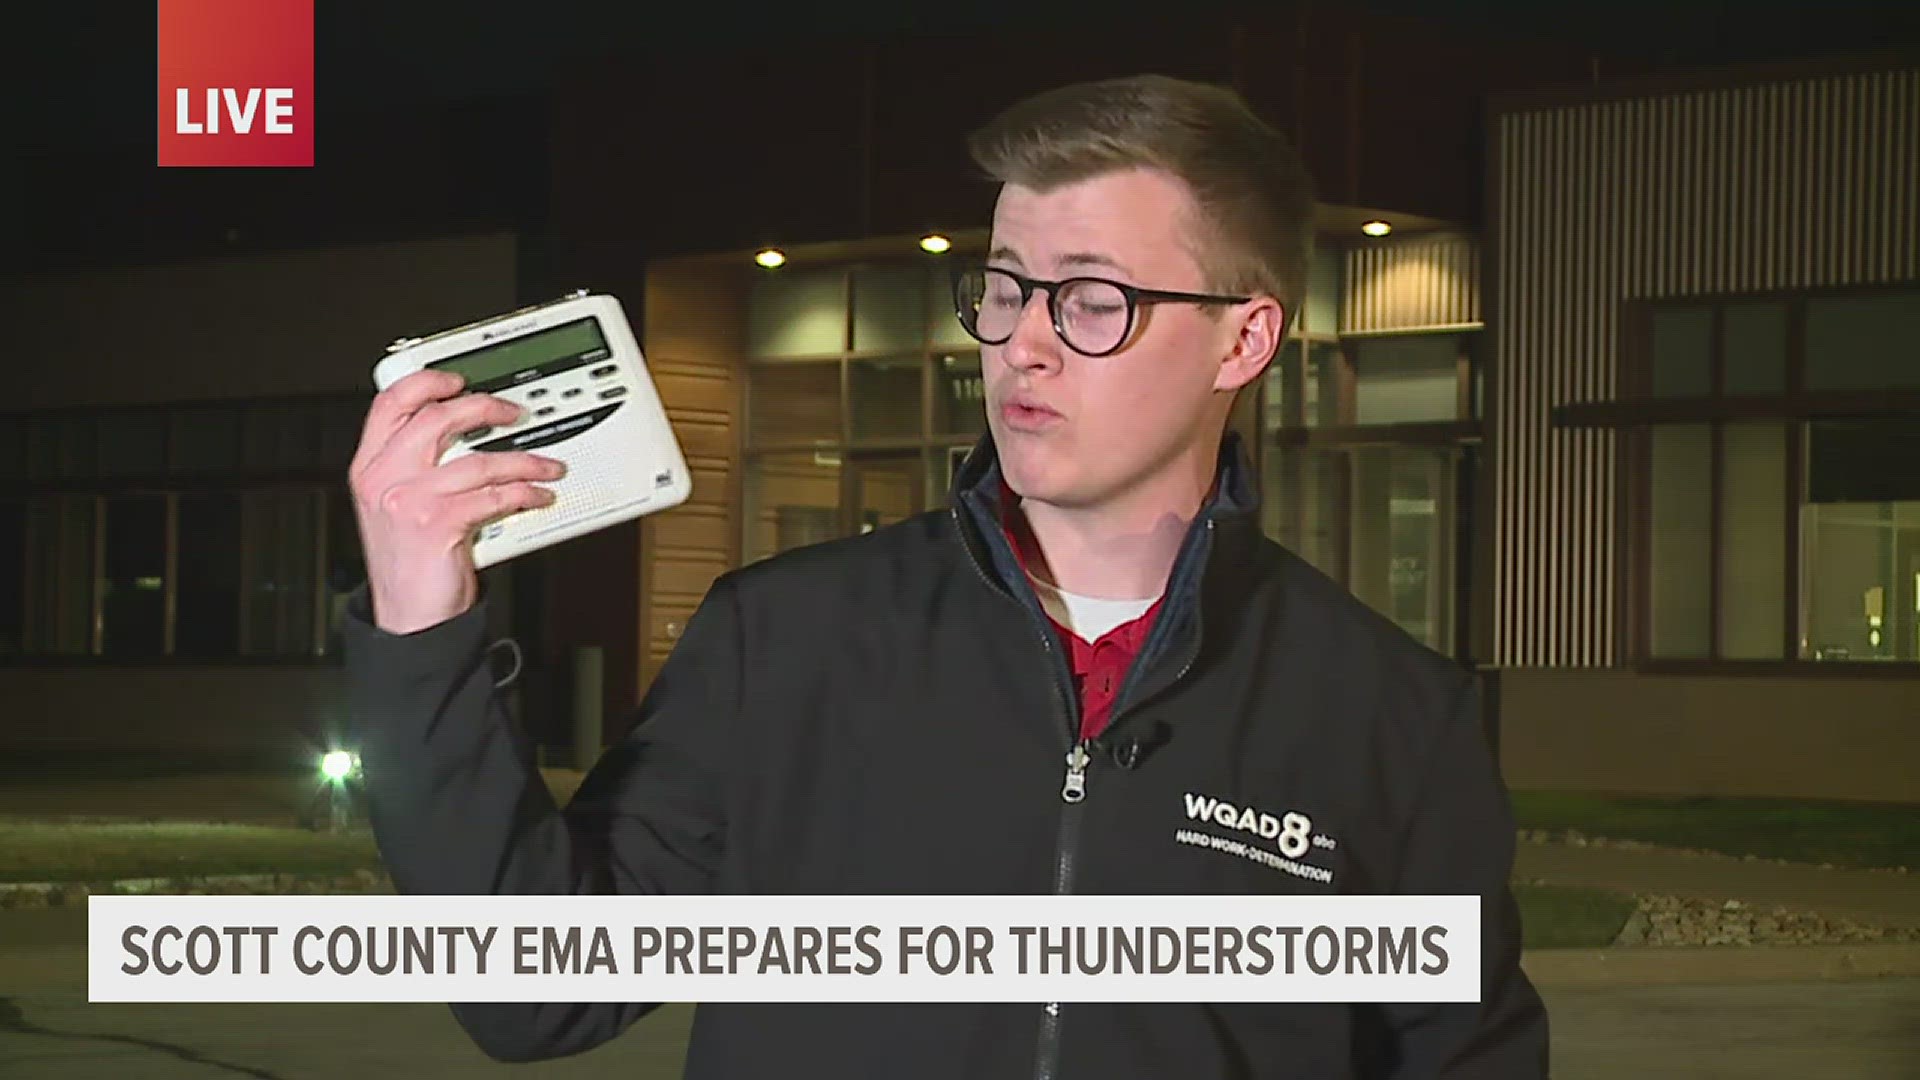 Since the QCA is at a level 4/5 risk for severe thunderstorms Friday, March 31, Officials recommend you have an emergency kit ready in your home.